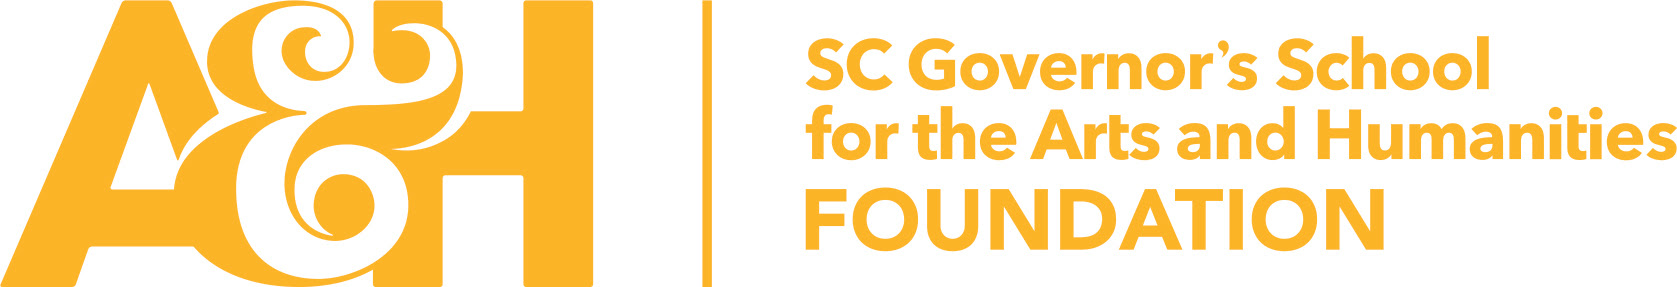 Yellow logo for Governor's School Foundation